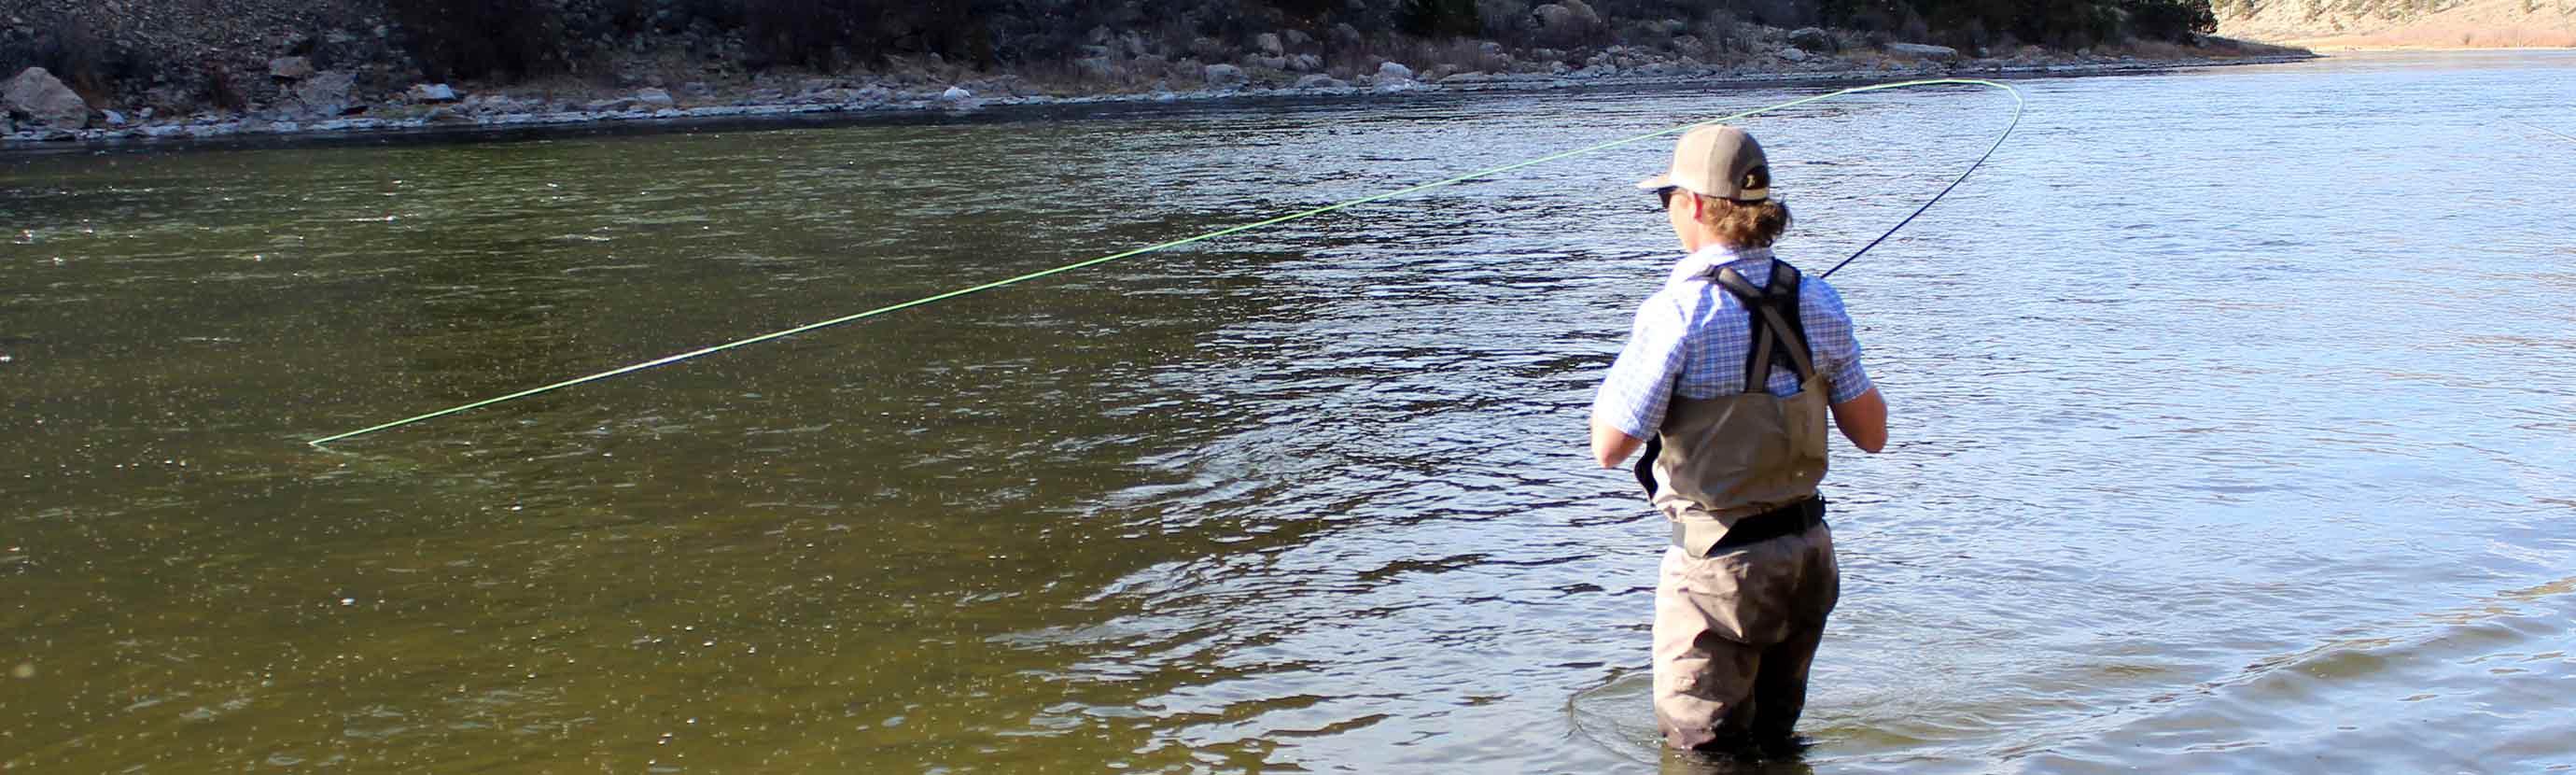 Get Hooked Up<sup>®</sup> with Montana Casting Co.<sup>®</sup> fly fishing gear!